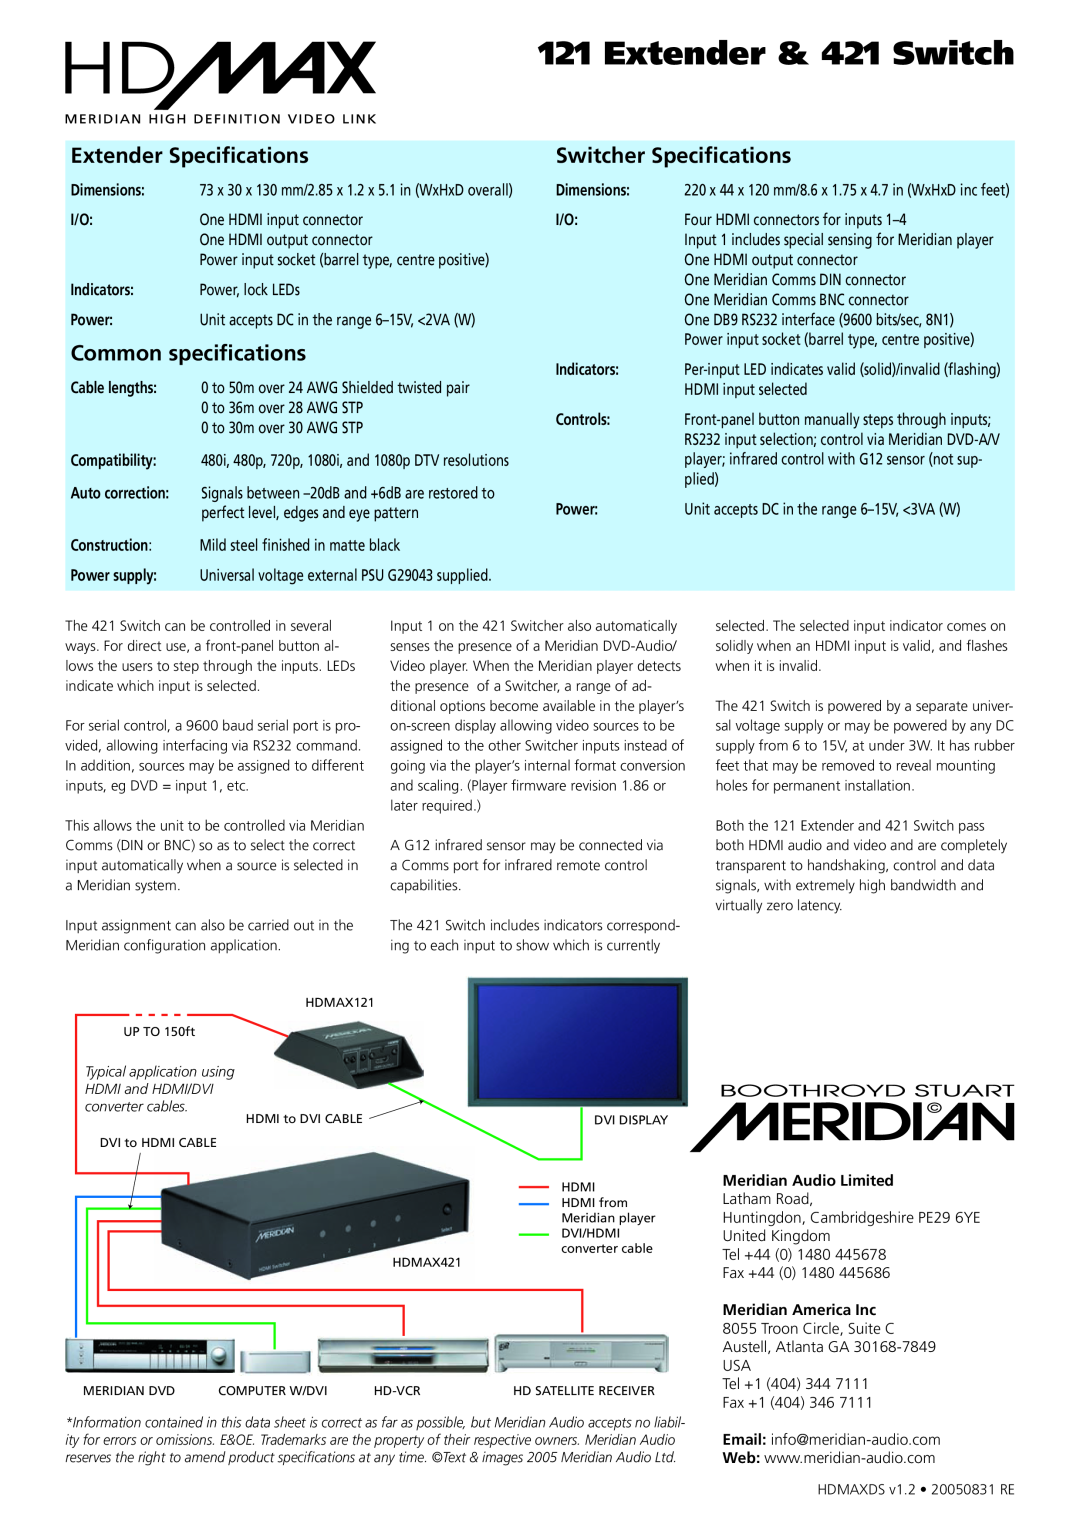 Meridian America 421 Extender Speciﬁcations, Common speciﬁcations, Switcher Speciﬁcations, Meridian Audio Limited, Power 